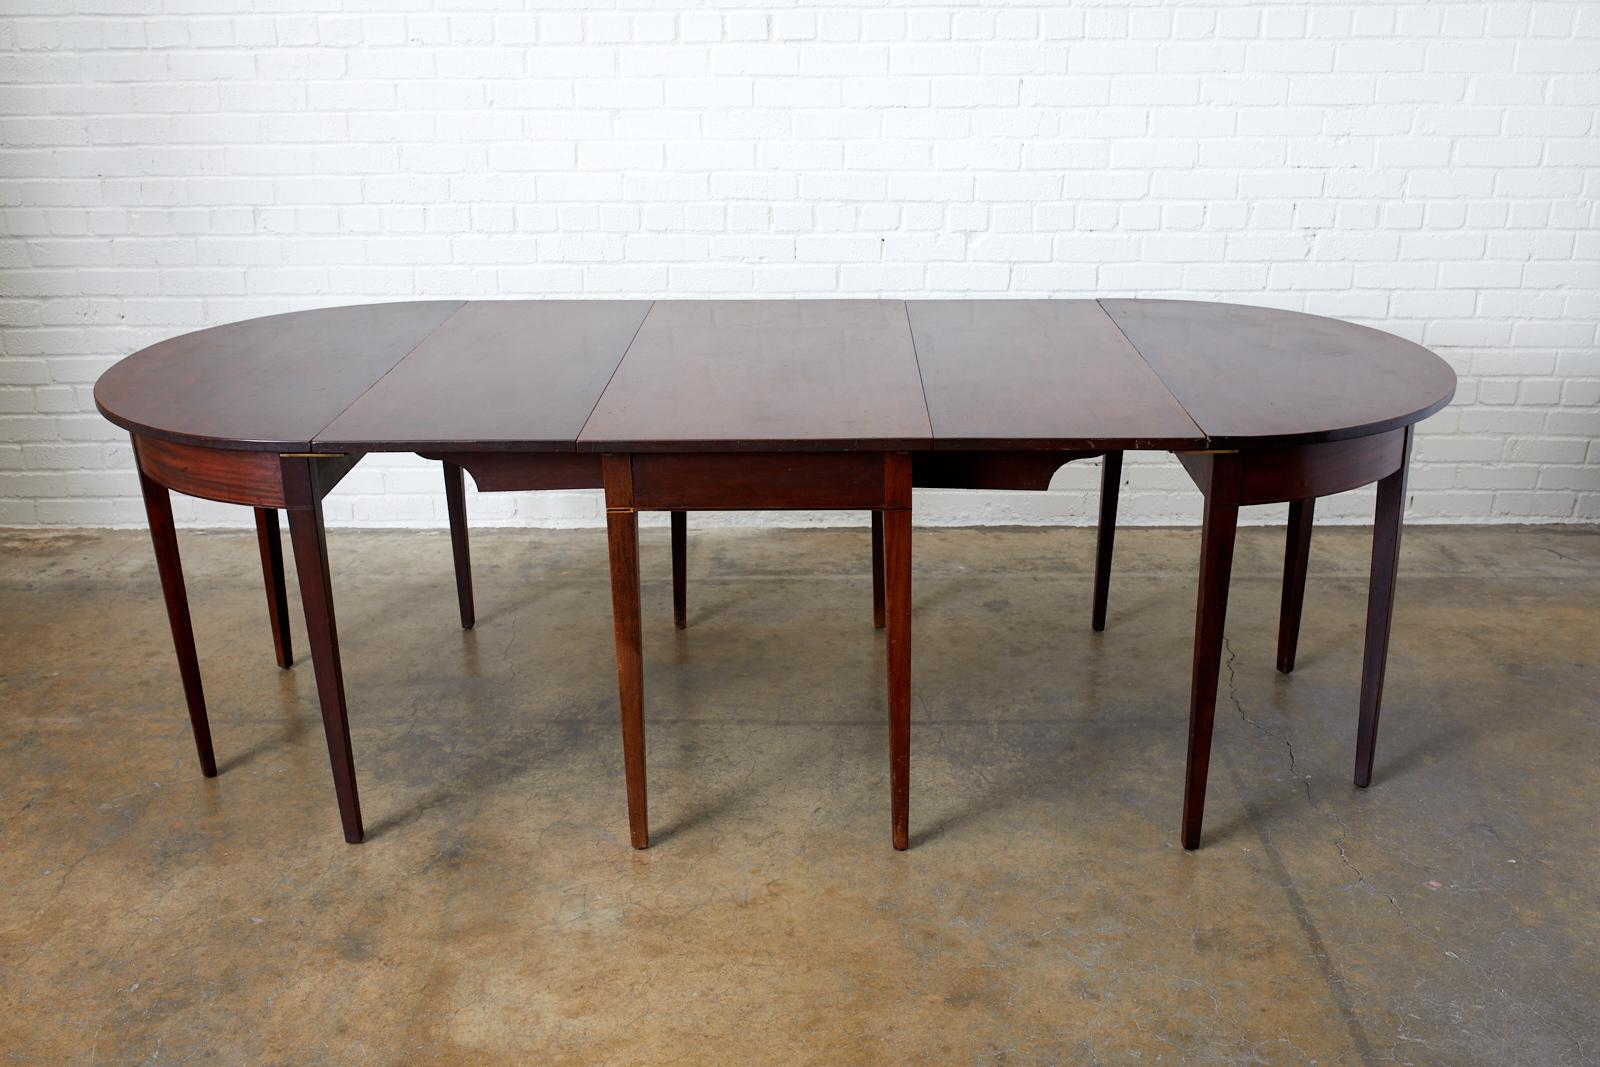 Hand-Crafted English Hepplewhite Mahogany Dining Table with Demilunes